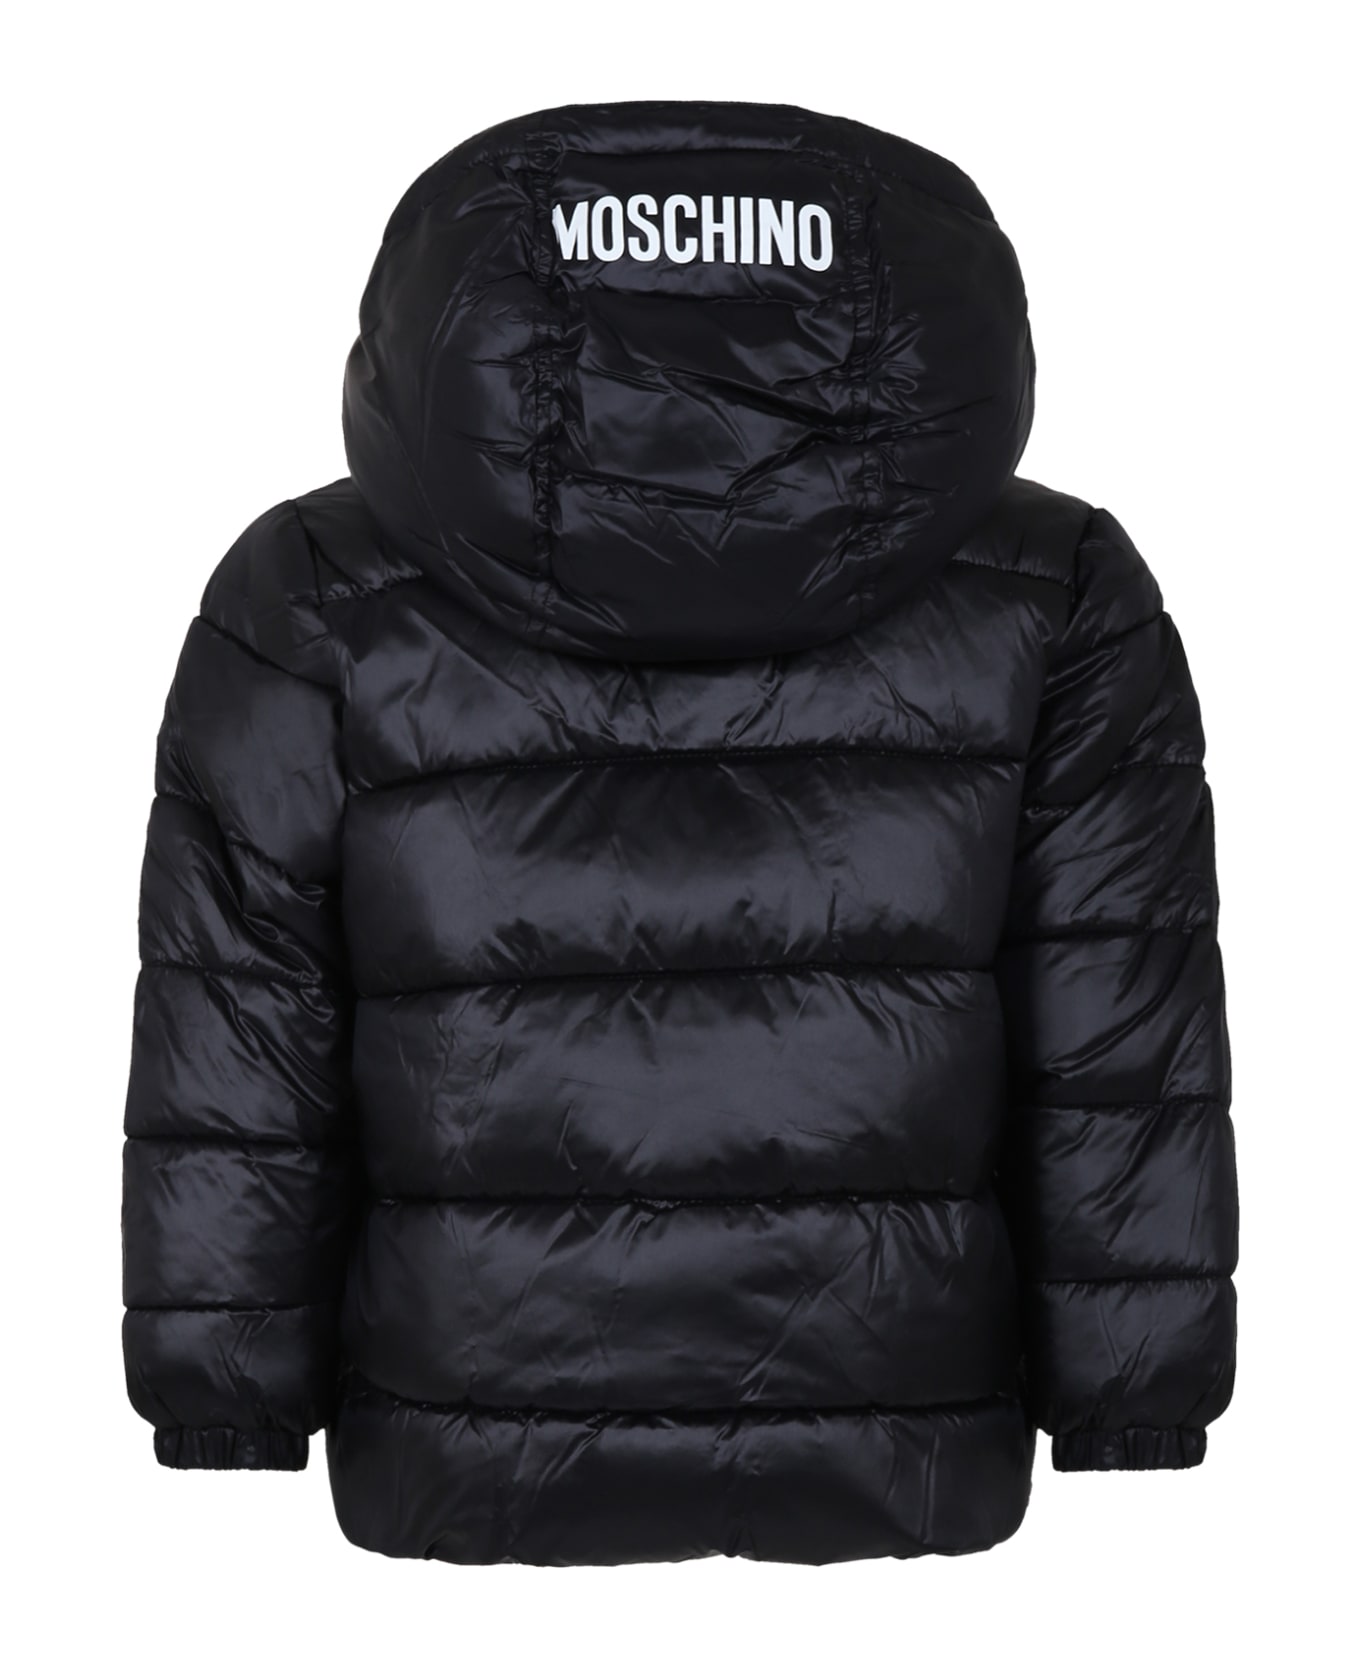 Moschino Black Down Jacket For Boy With Teddy Bears And Logo - Black